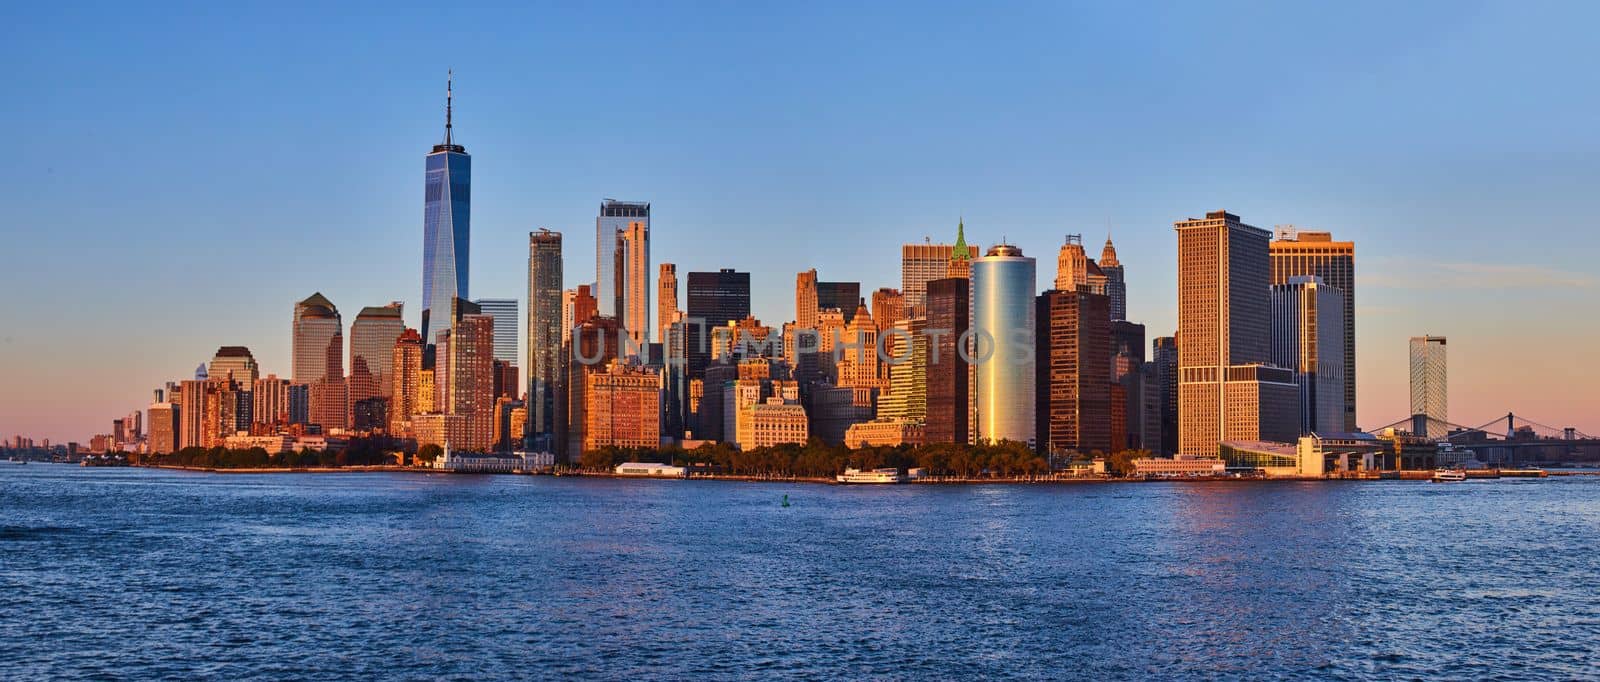 Panoramic golden hour skyline of southern Manhattan New York City skyline from ferry with water in front by njproductions